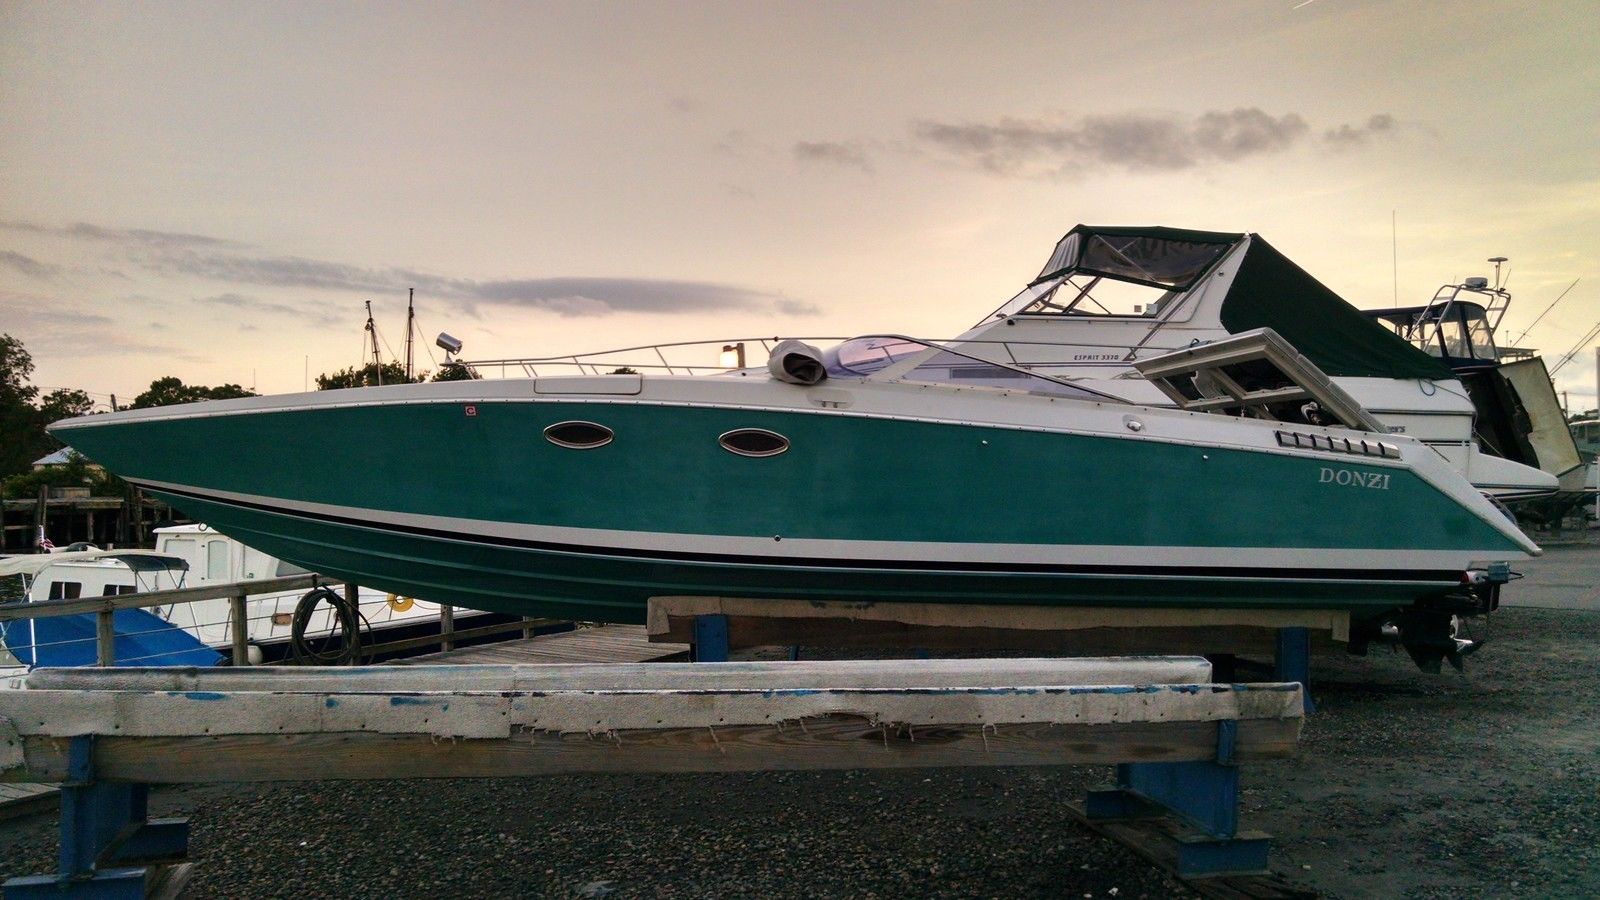 38 donzi zx for sale - 🧡 Yacht for sale Donzi 27 ZR: price 157415...